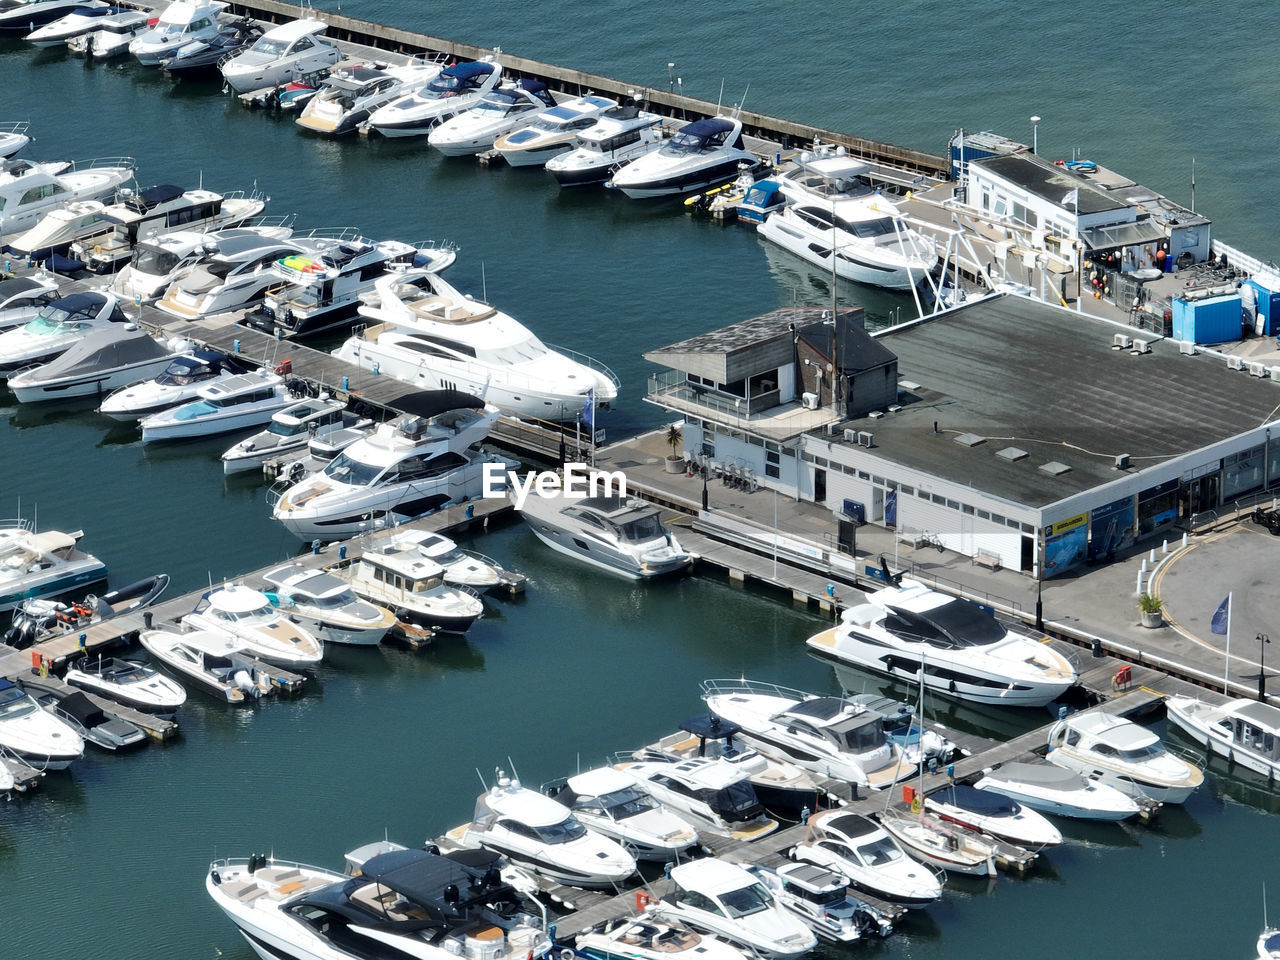 marina, nautical vessel, water, transportation, dock, port, mode of transportation, high angle view, harbor, moored, sea, vehicle, ship, no people, architecture, pier, aerial view, aerial photography, nature, infrastructure, boat, day, outdoors, city, yacht, travel, watercraft, large group of objects, travel destinations, building exterior